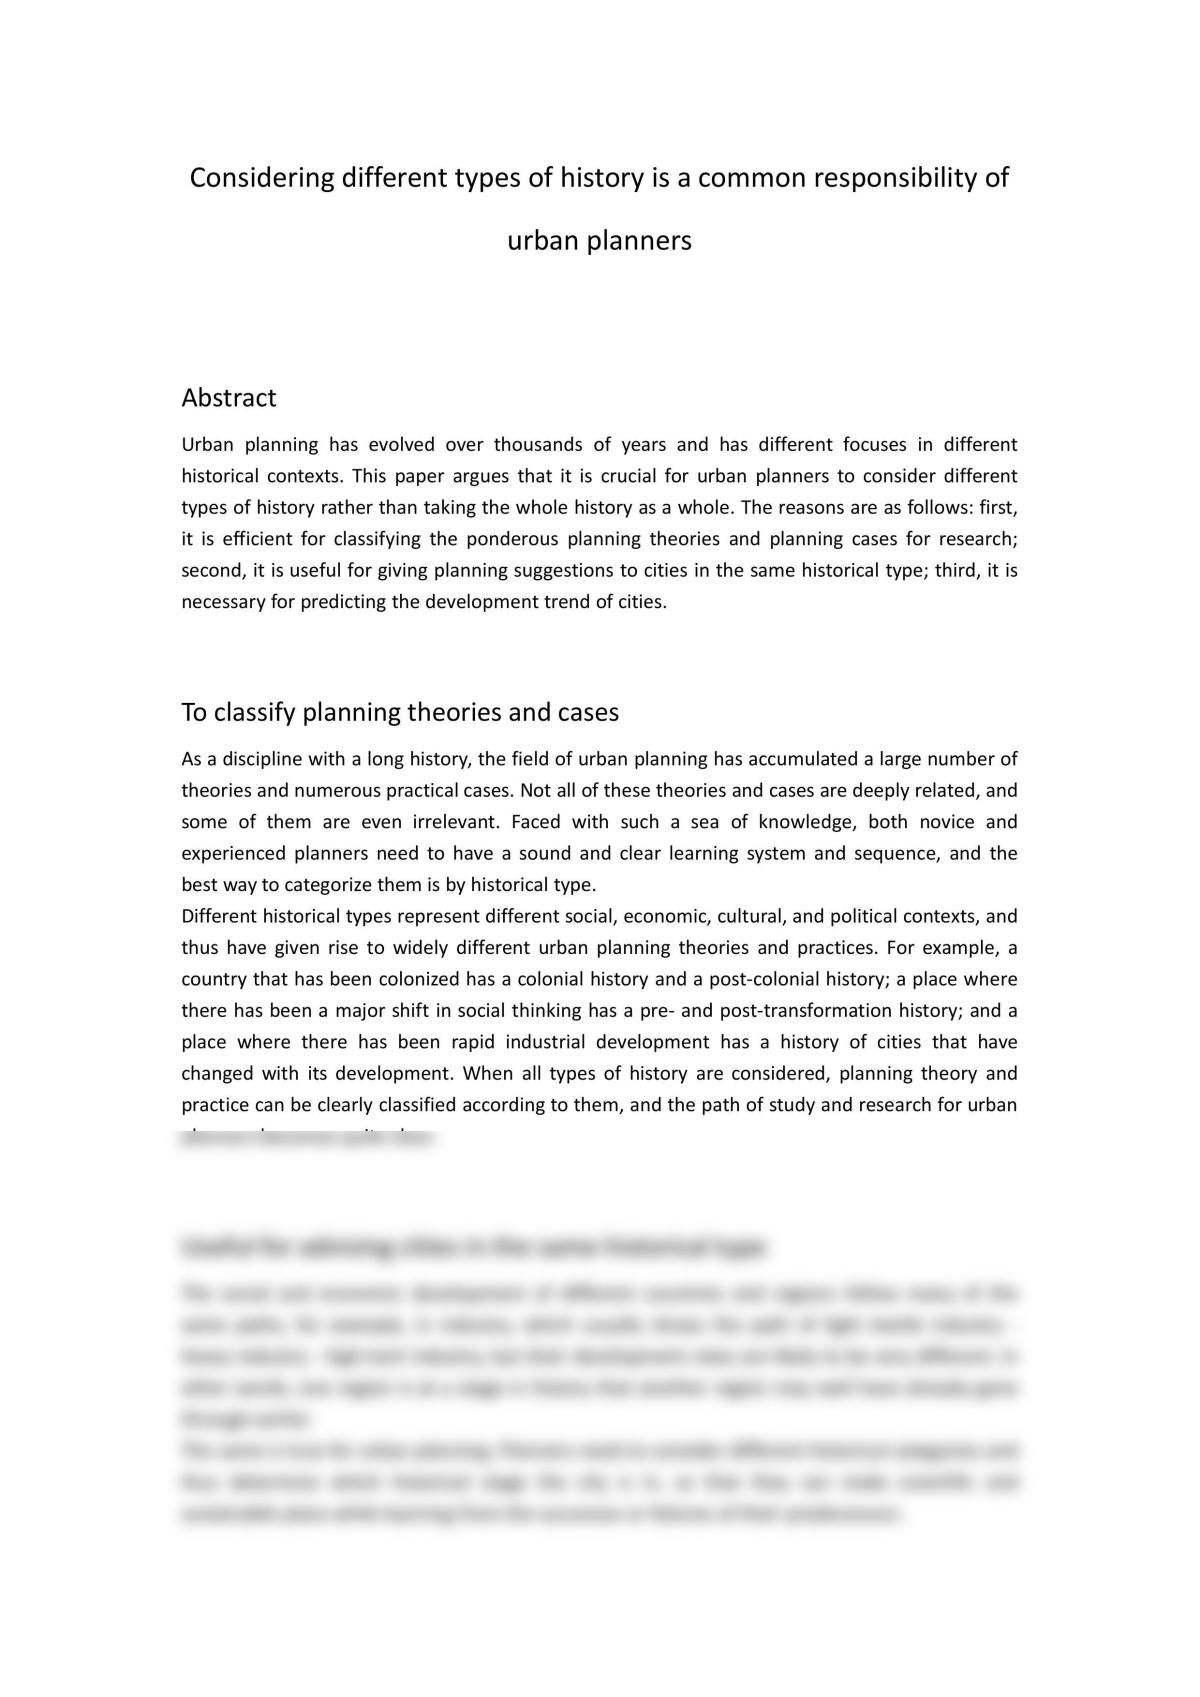 Tutorial paper 1 - Page 1